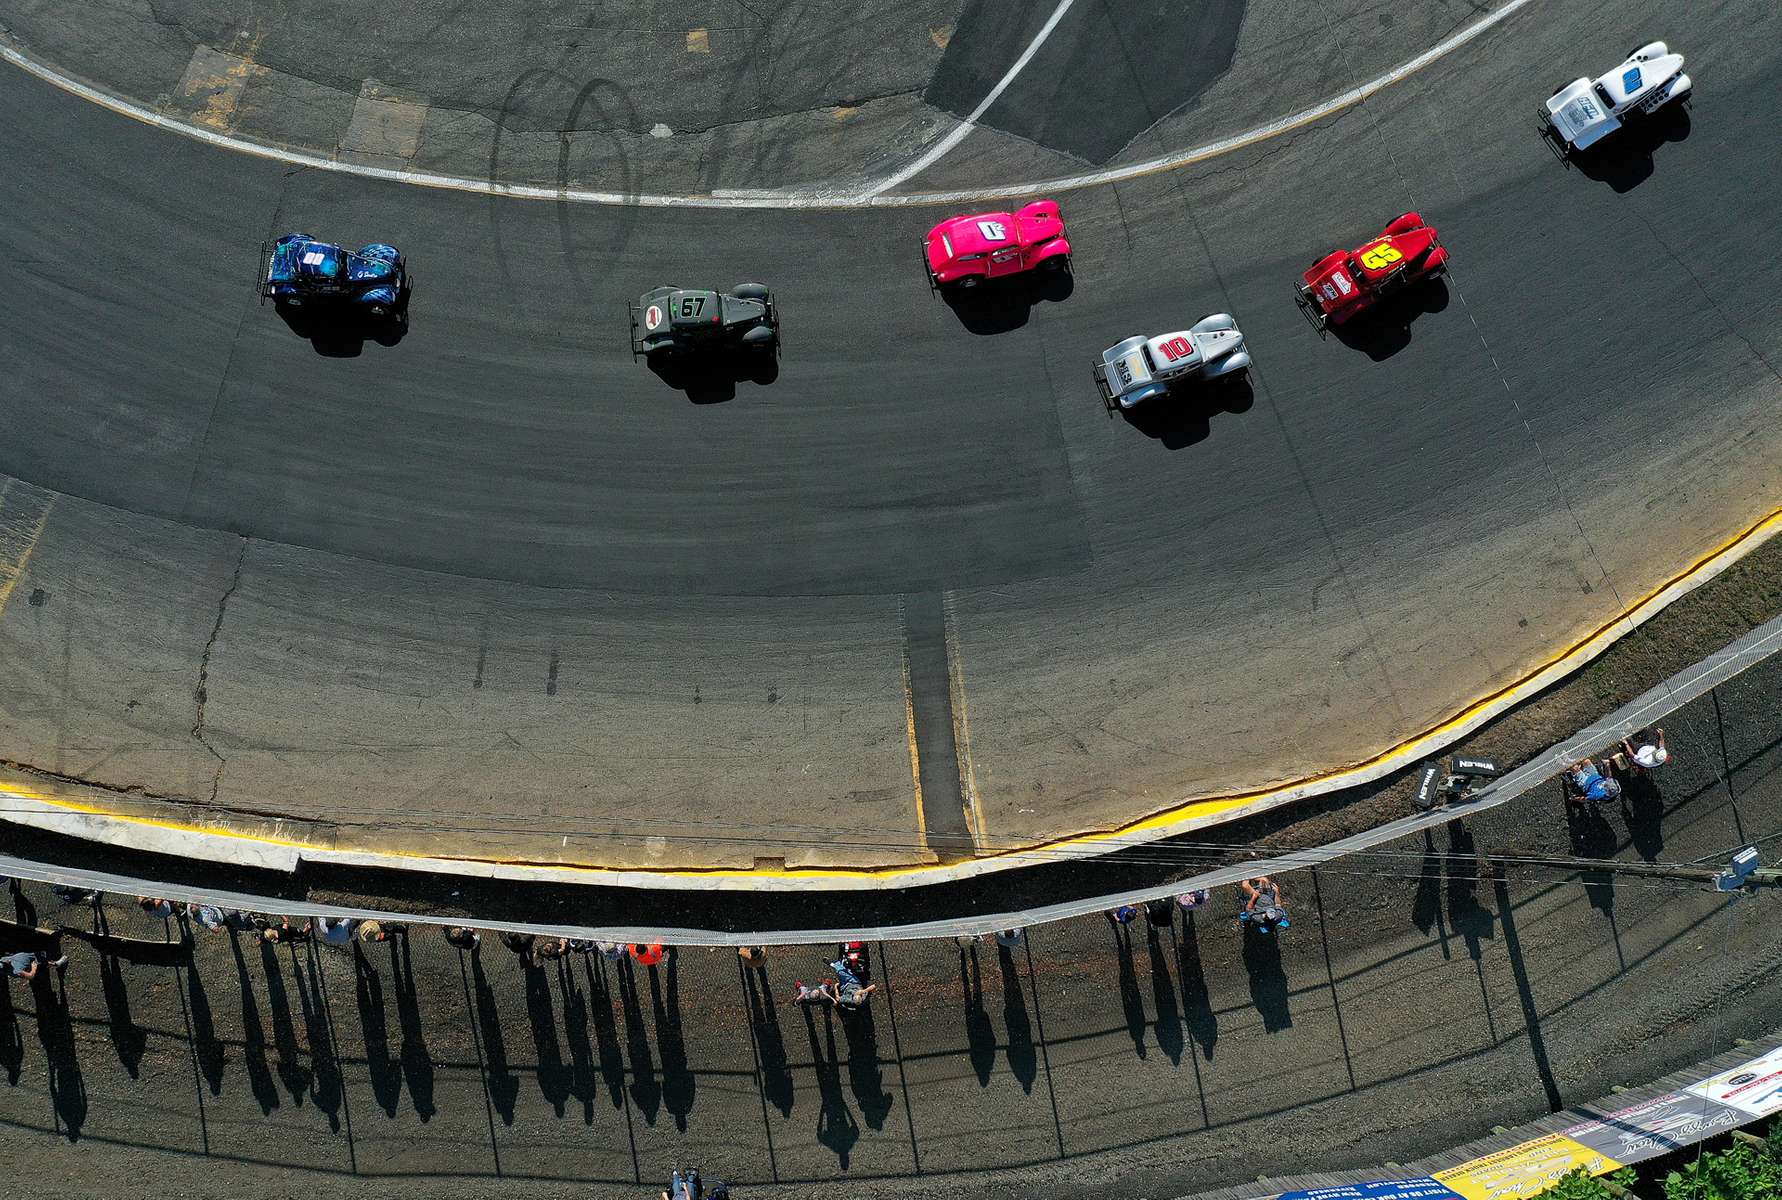 An aerial view of a cars racing around the track during NASCAR Advance Auto Series Opening Night at Riverhead Raceway on August 01, 2020 in Riverhead, New York.  The race track had been closed due to the coronavirus COVID-19 pandemic.  More than 4,585,258 people in the United States alone have been infected with the coronavirus and at least 154,000 have died.  